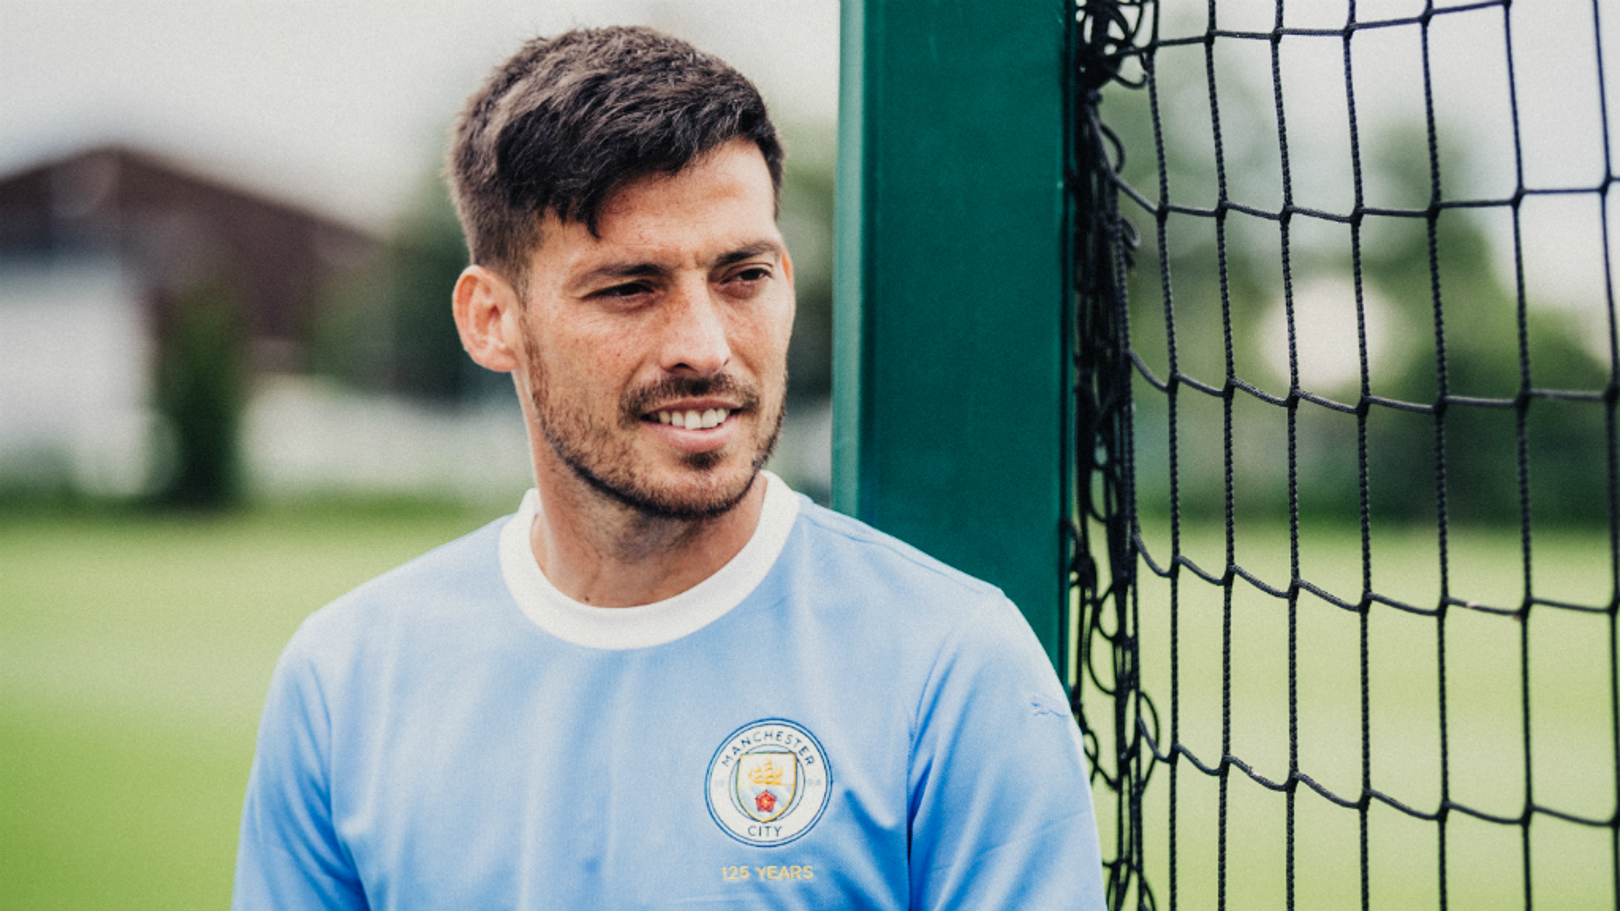 City 125 anniversary season launches with new kit